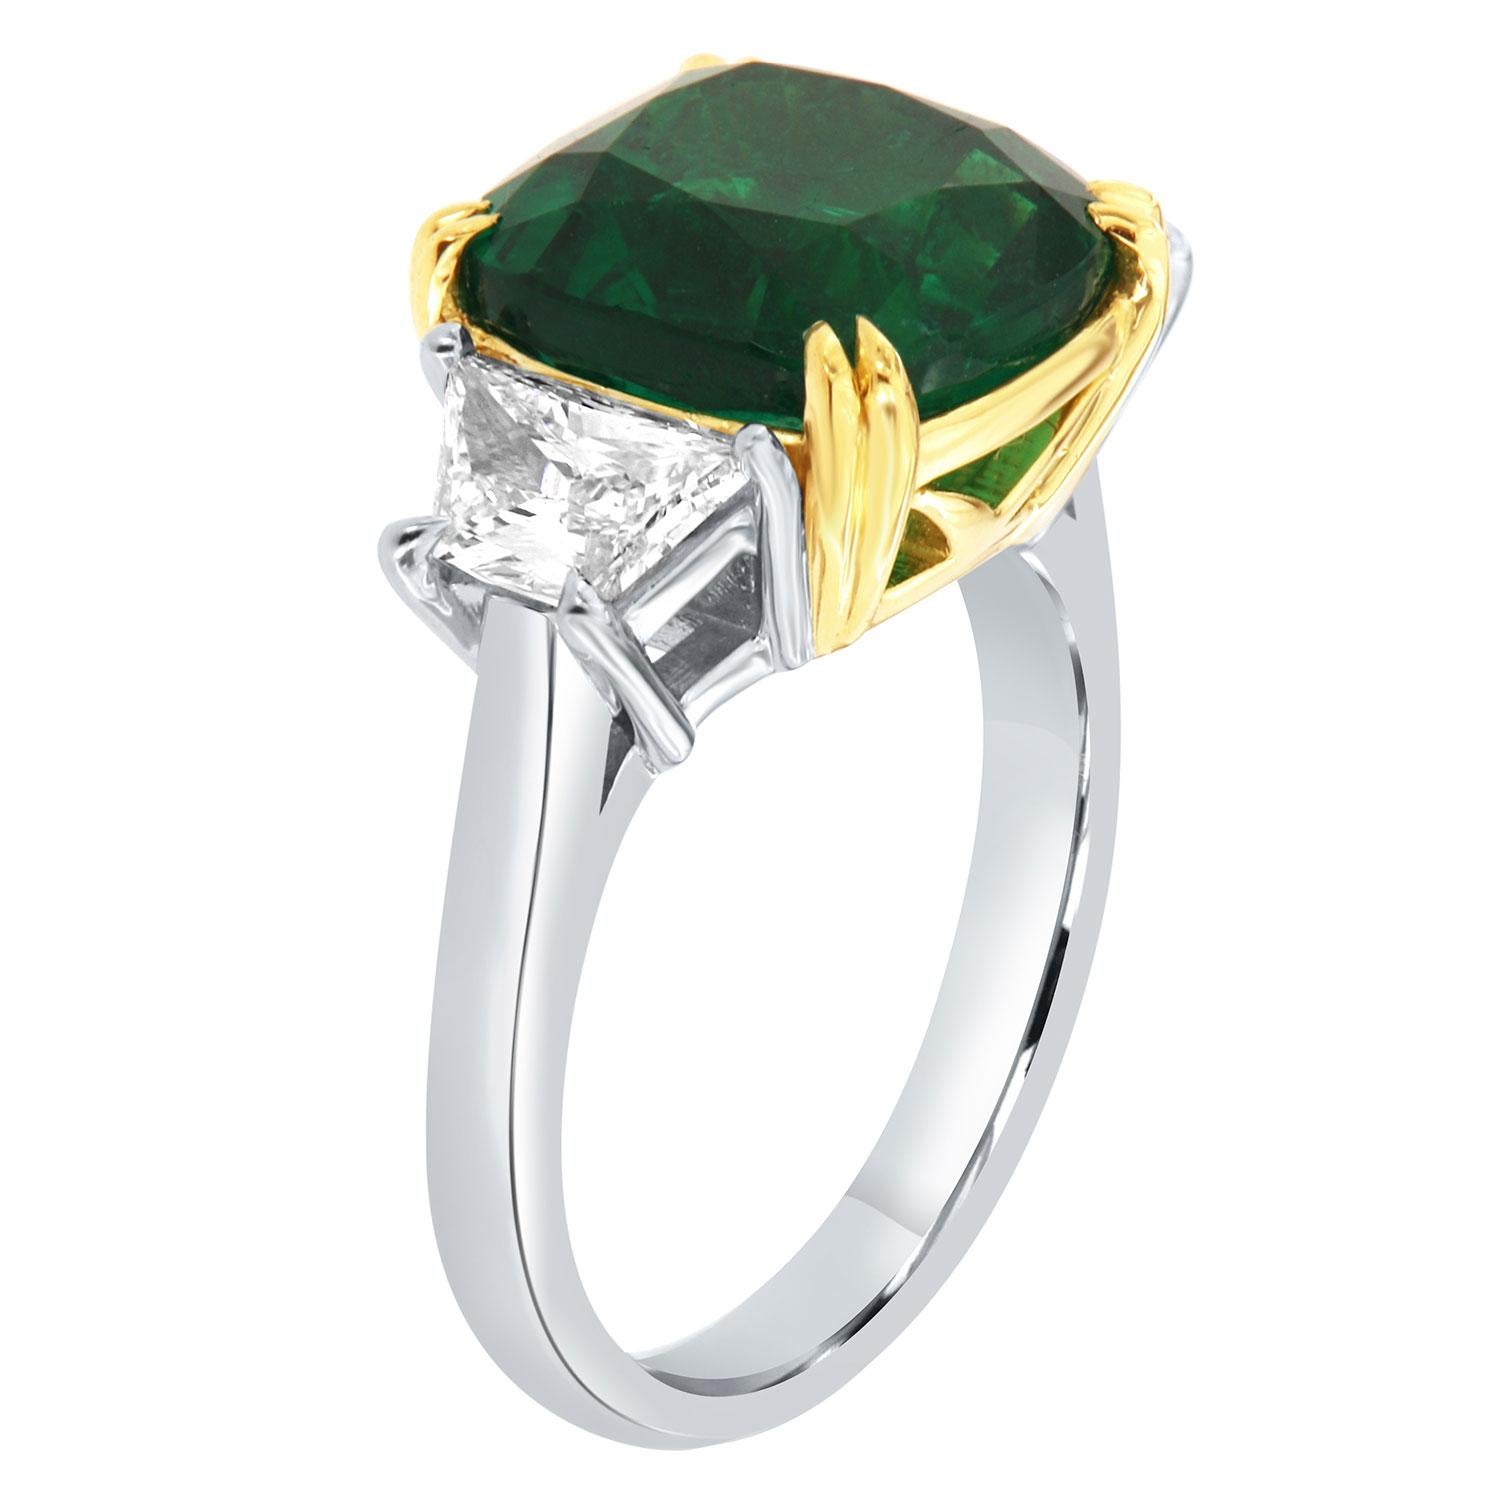 This one-of-a-kind three-stone Platinum ring features a Rare Natural 5.99 Carat Cushion Zambian Emerald flanked by two trapezoid shape diamonds in total weight of 1.08 Carat on a 2.6 mm wide band.  This extraordinary Emerald exhibits a vibrant green